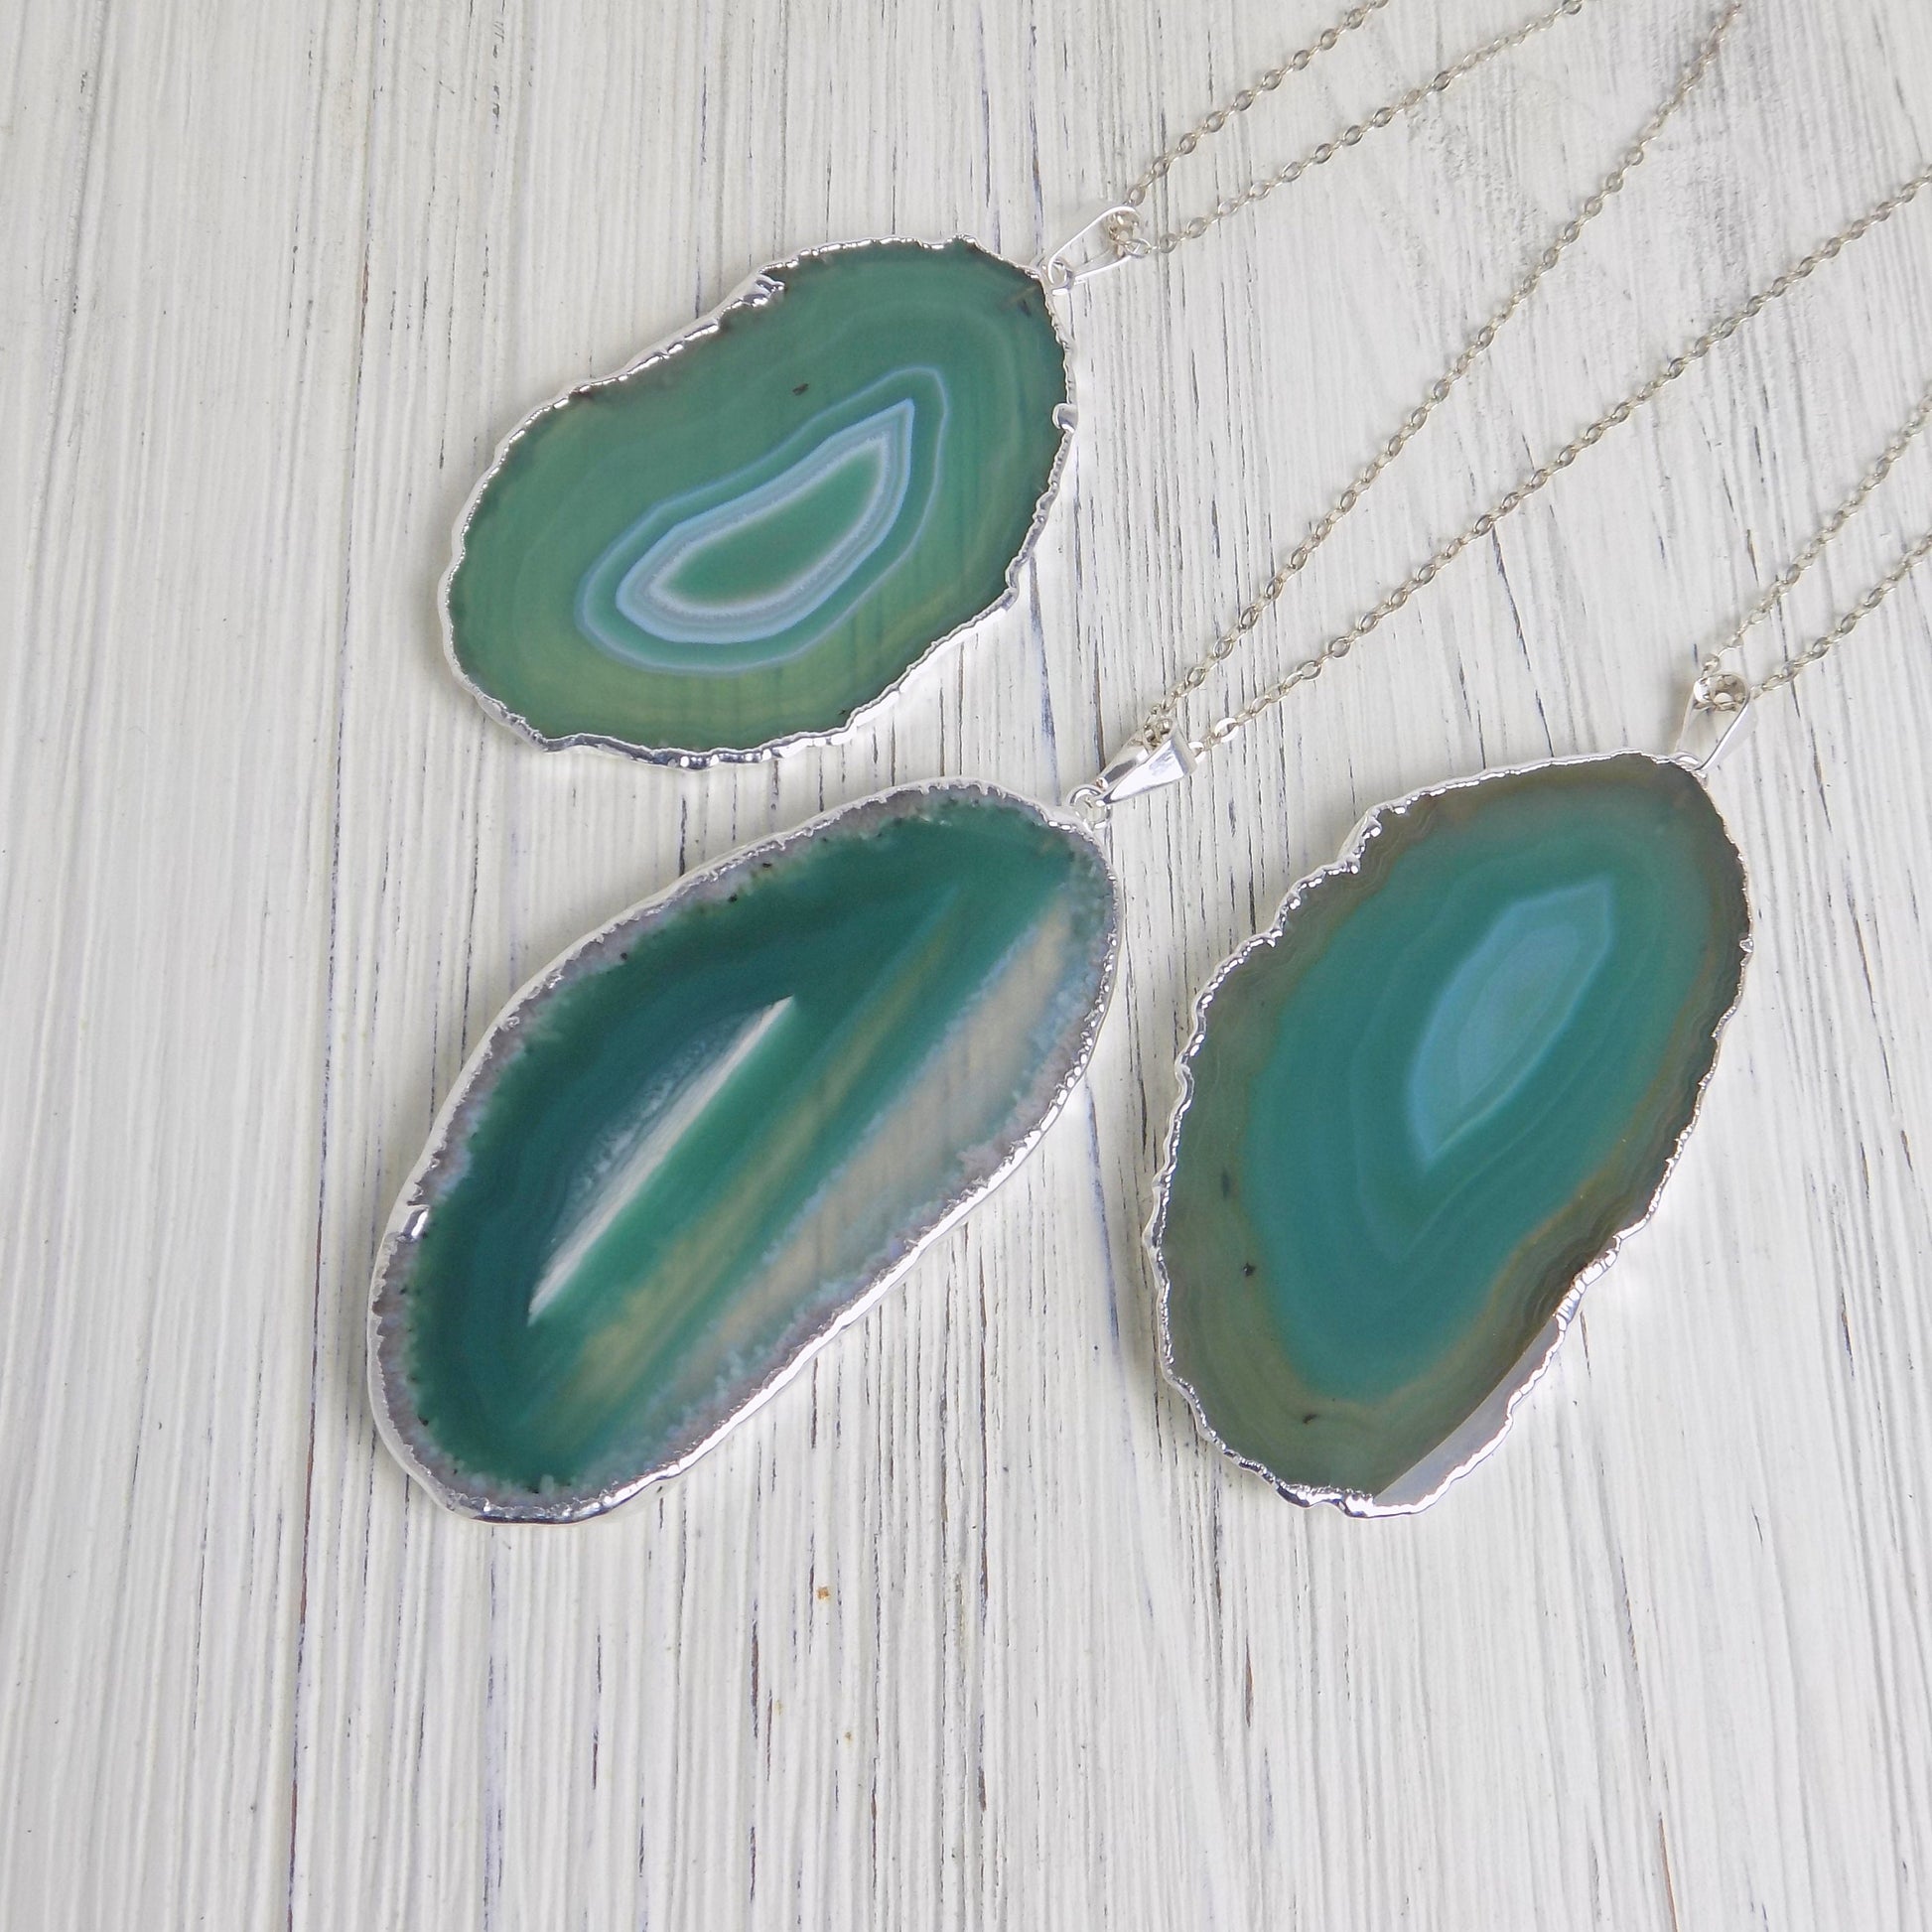 Agate Necklace Silver - Green Agate Pendant Necklace